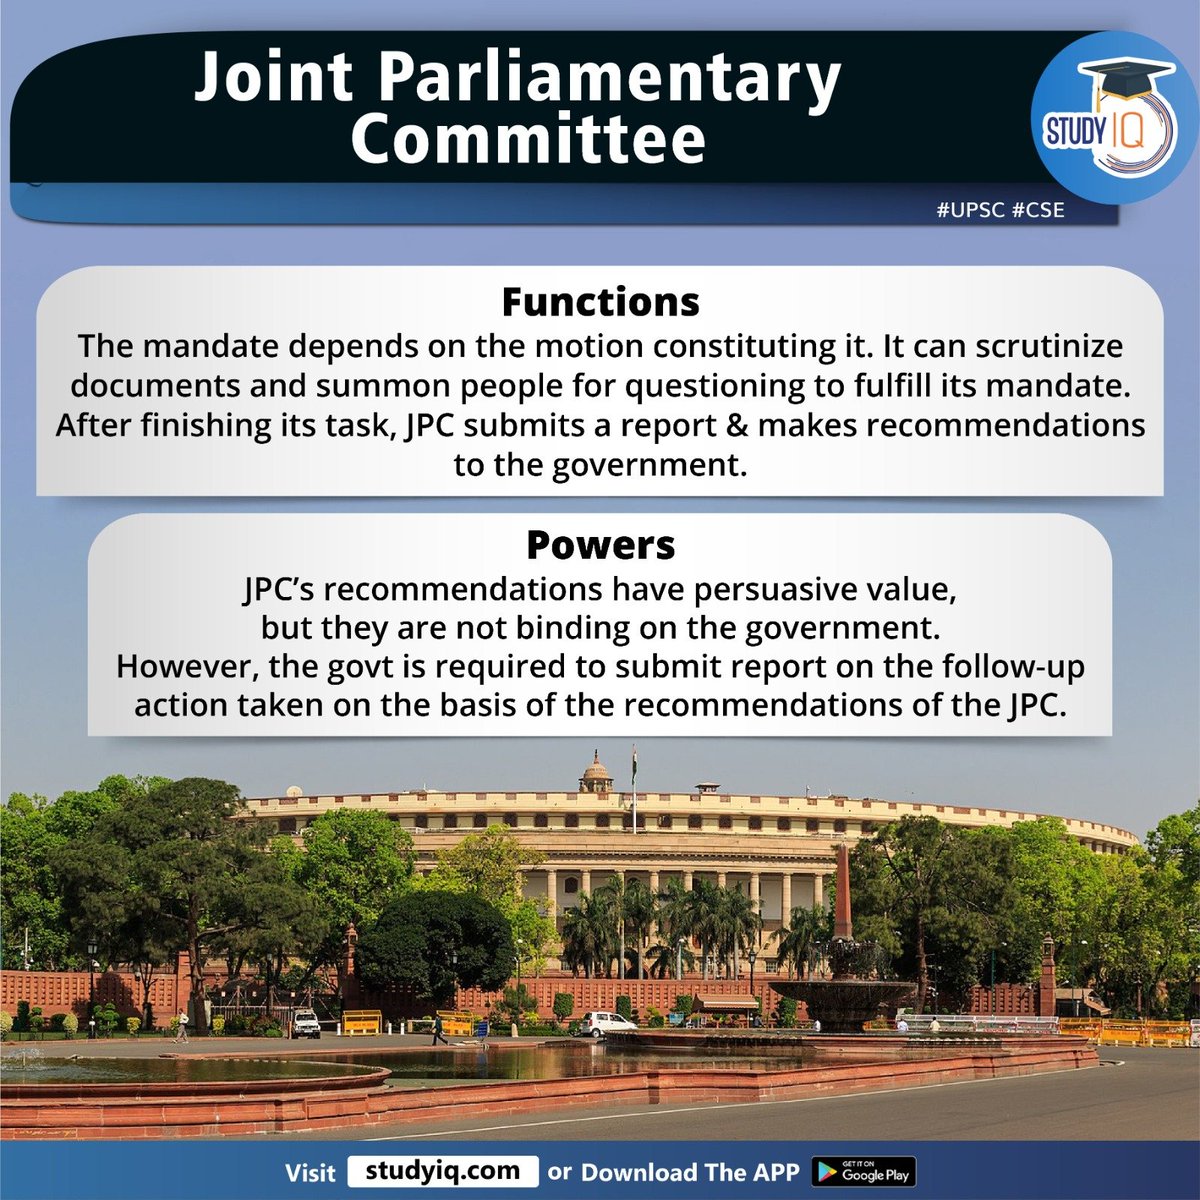 Joint Parliamentary Committee

#jointparliamentarycommittee #parliamentarycommittee #whyinnews #jpc #allegationsofstock #adanigroup #bill #houses #oppositionparymembers #completionoftask #houseofparliament #indiangovt #summonpeople #indiajps #upsc #cse #ips #ias